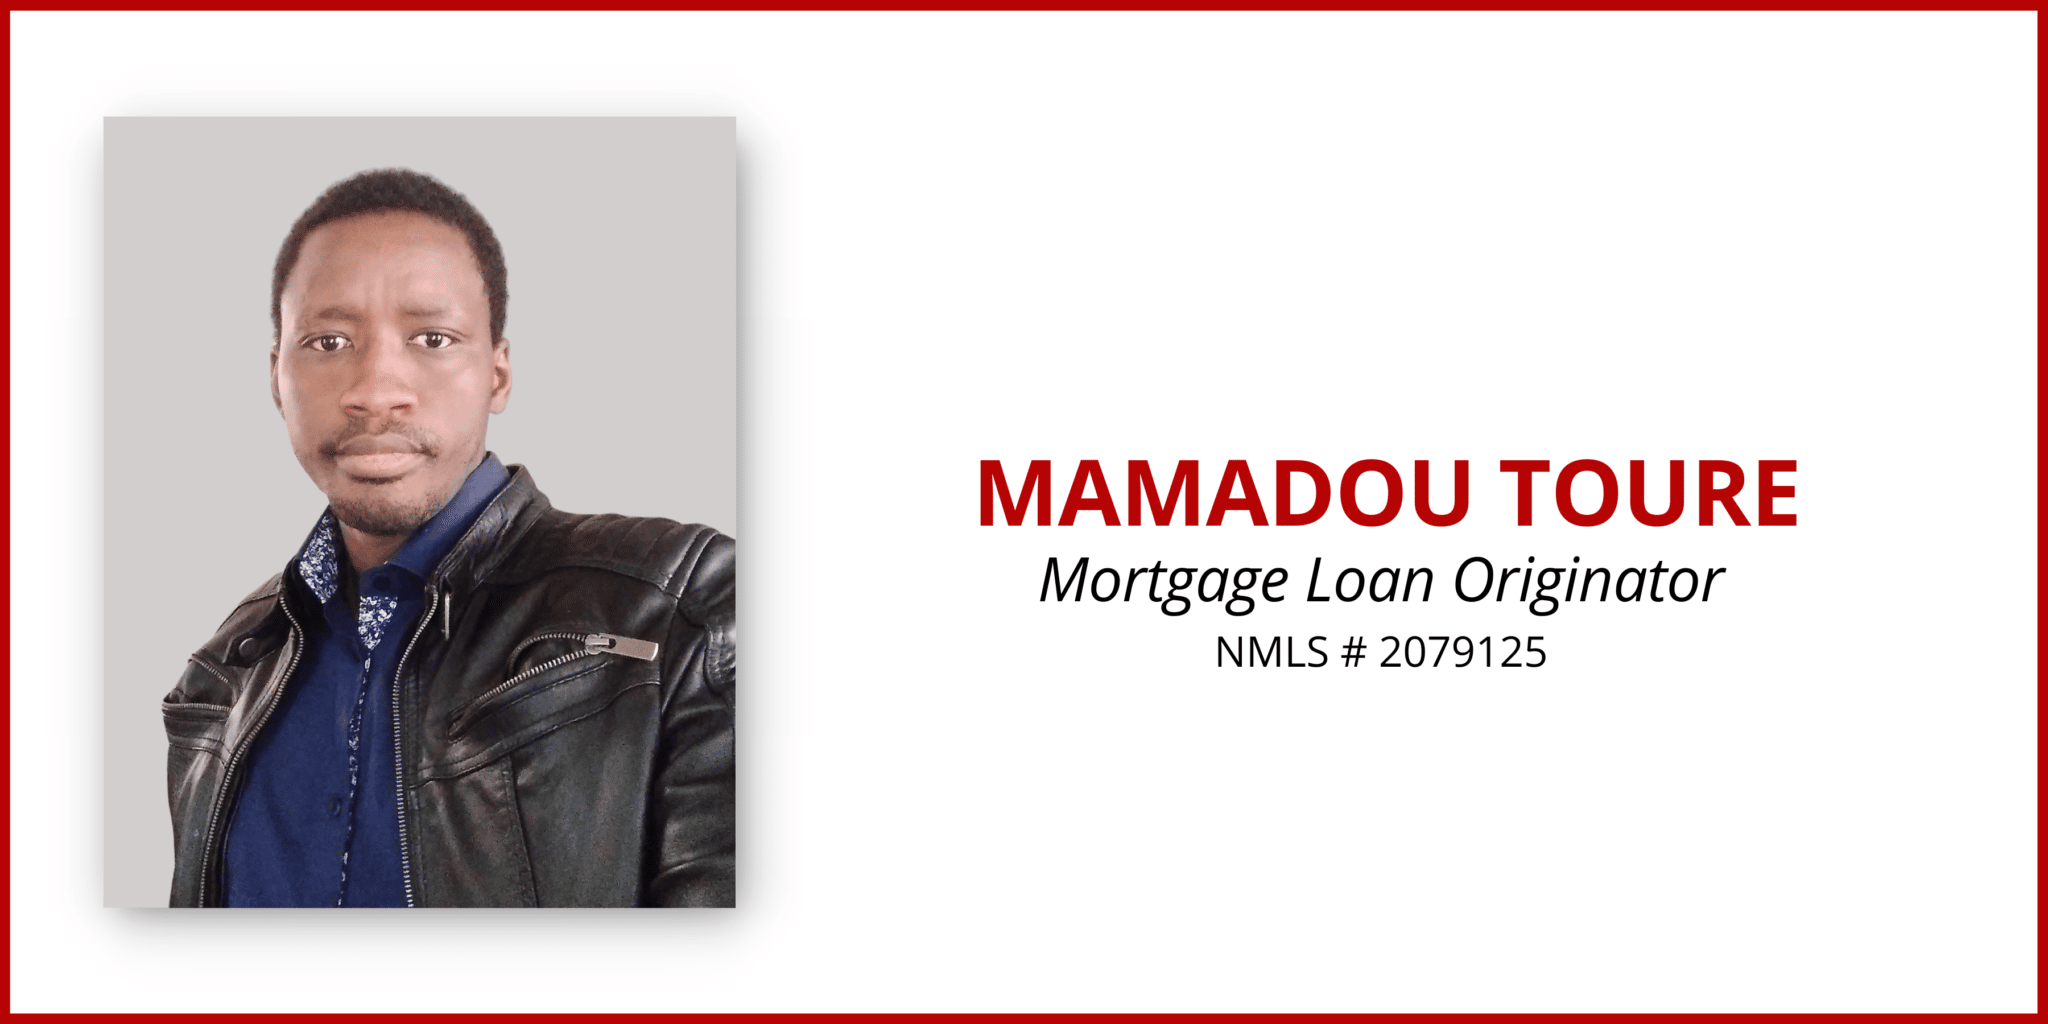 About Mamadou Toure – MortgageDepot